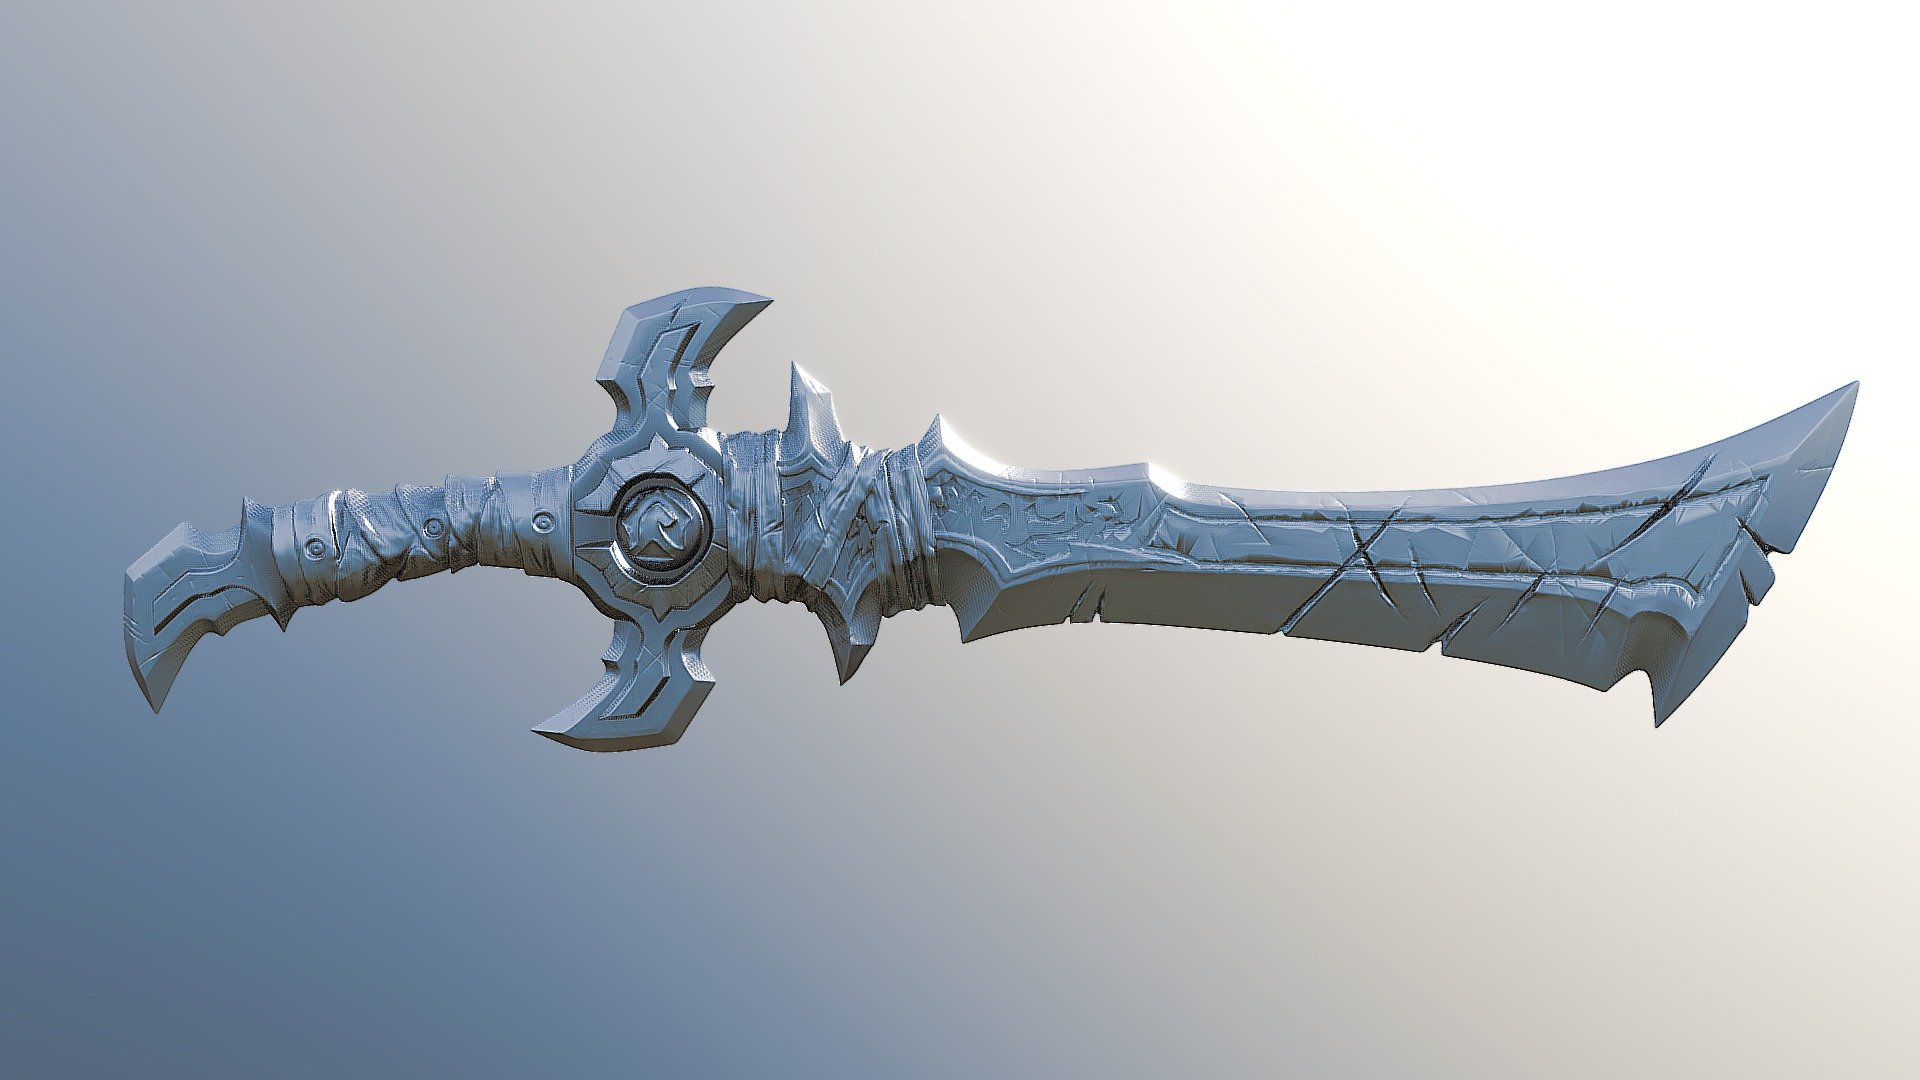 A stylized weapon from World of Warcraft
Modelled with 3DS Max and zBrush - Stylized Sword - 3D model by ArcRift 3d model